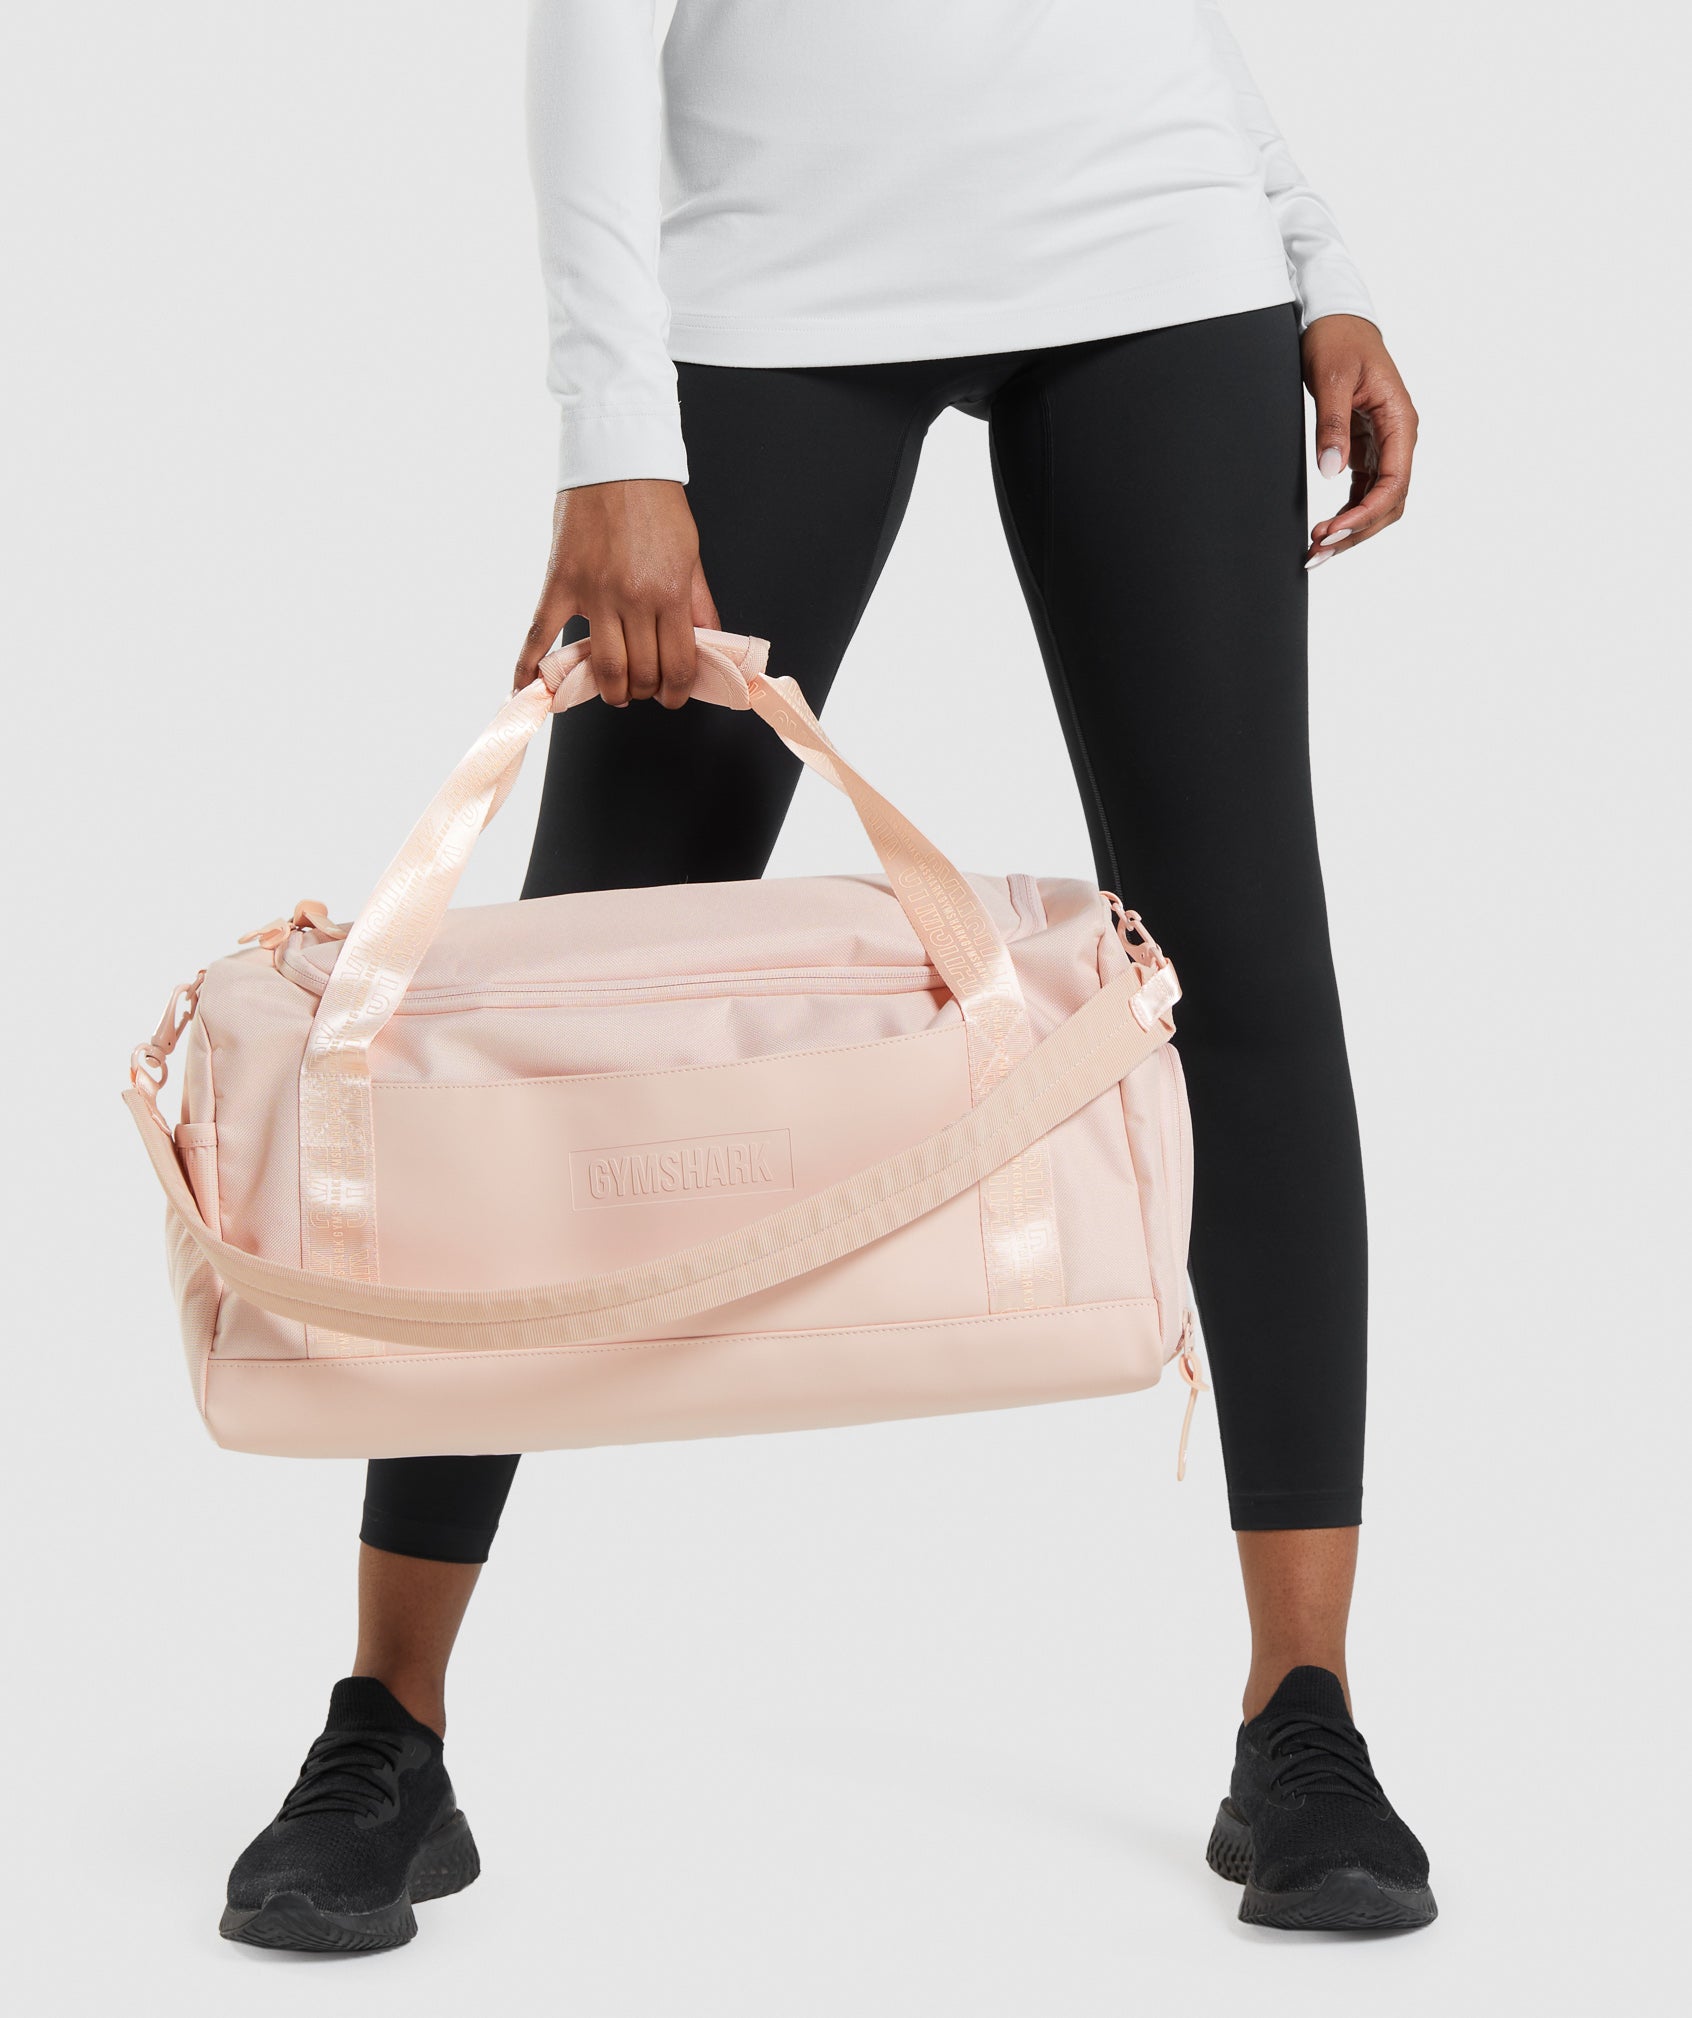 What a cute mini gym bag 😍 the color is everything! #gymshark #gymsha, gym bag